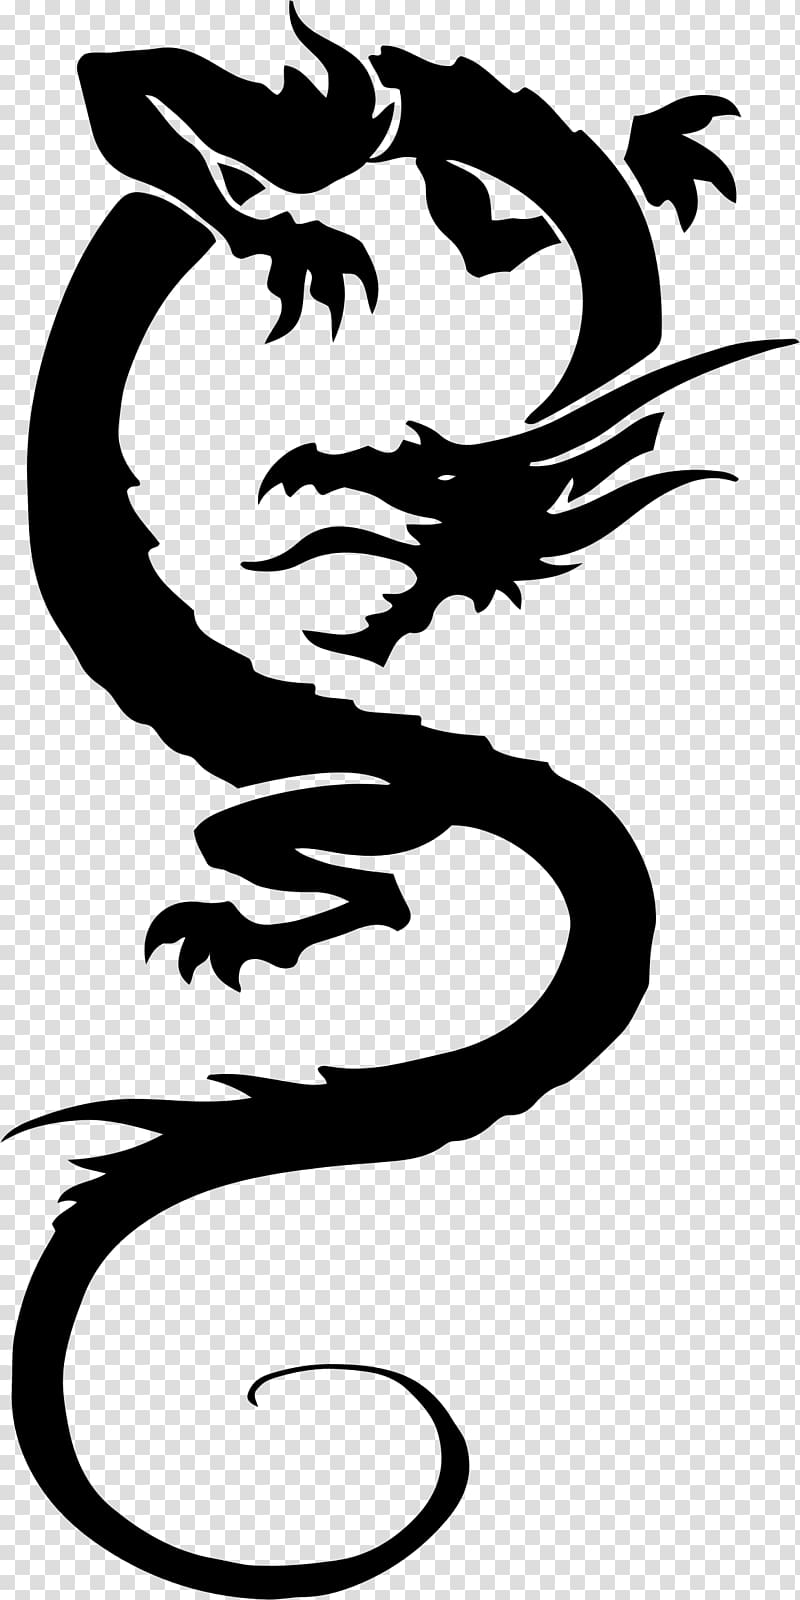 Tribal dragon tattoo Black and White Stock Photos & Images - Alamy